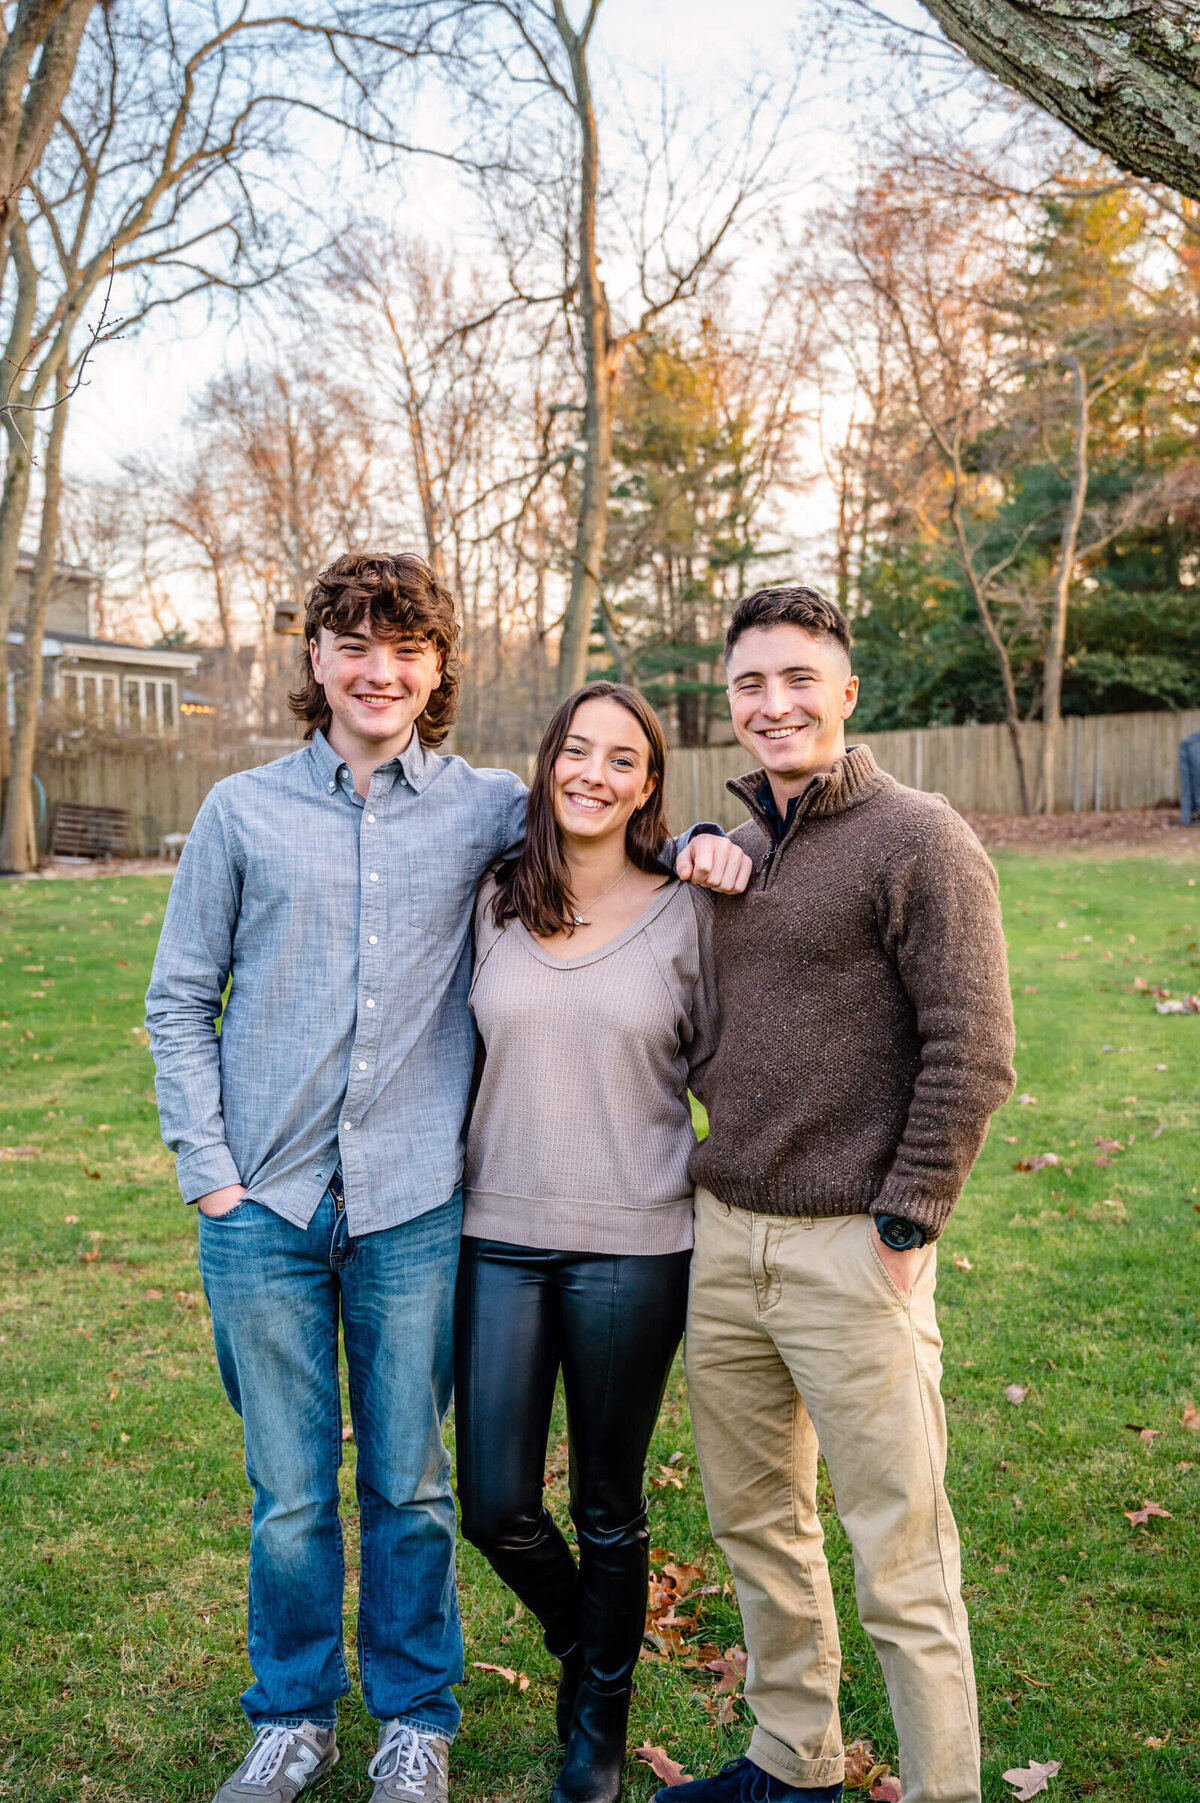 Three siblings - two brothers and a sister, young adults, standing next to each other posing for a family session outside.